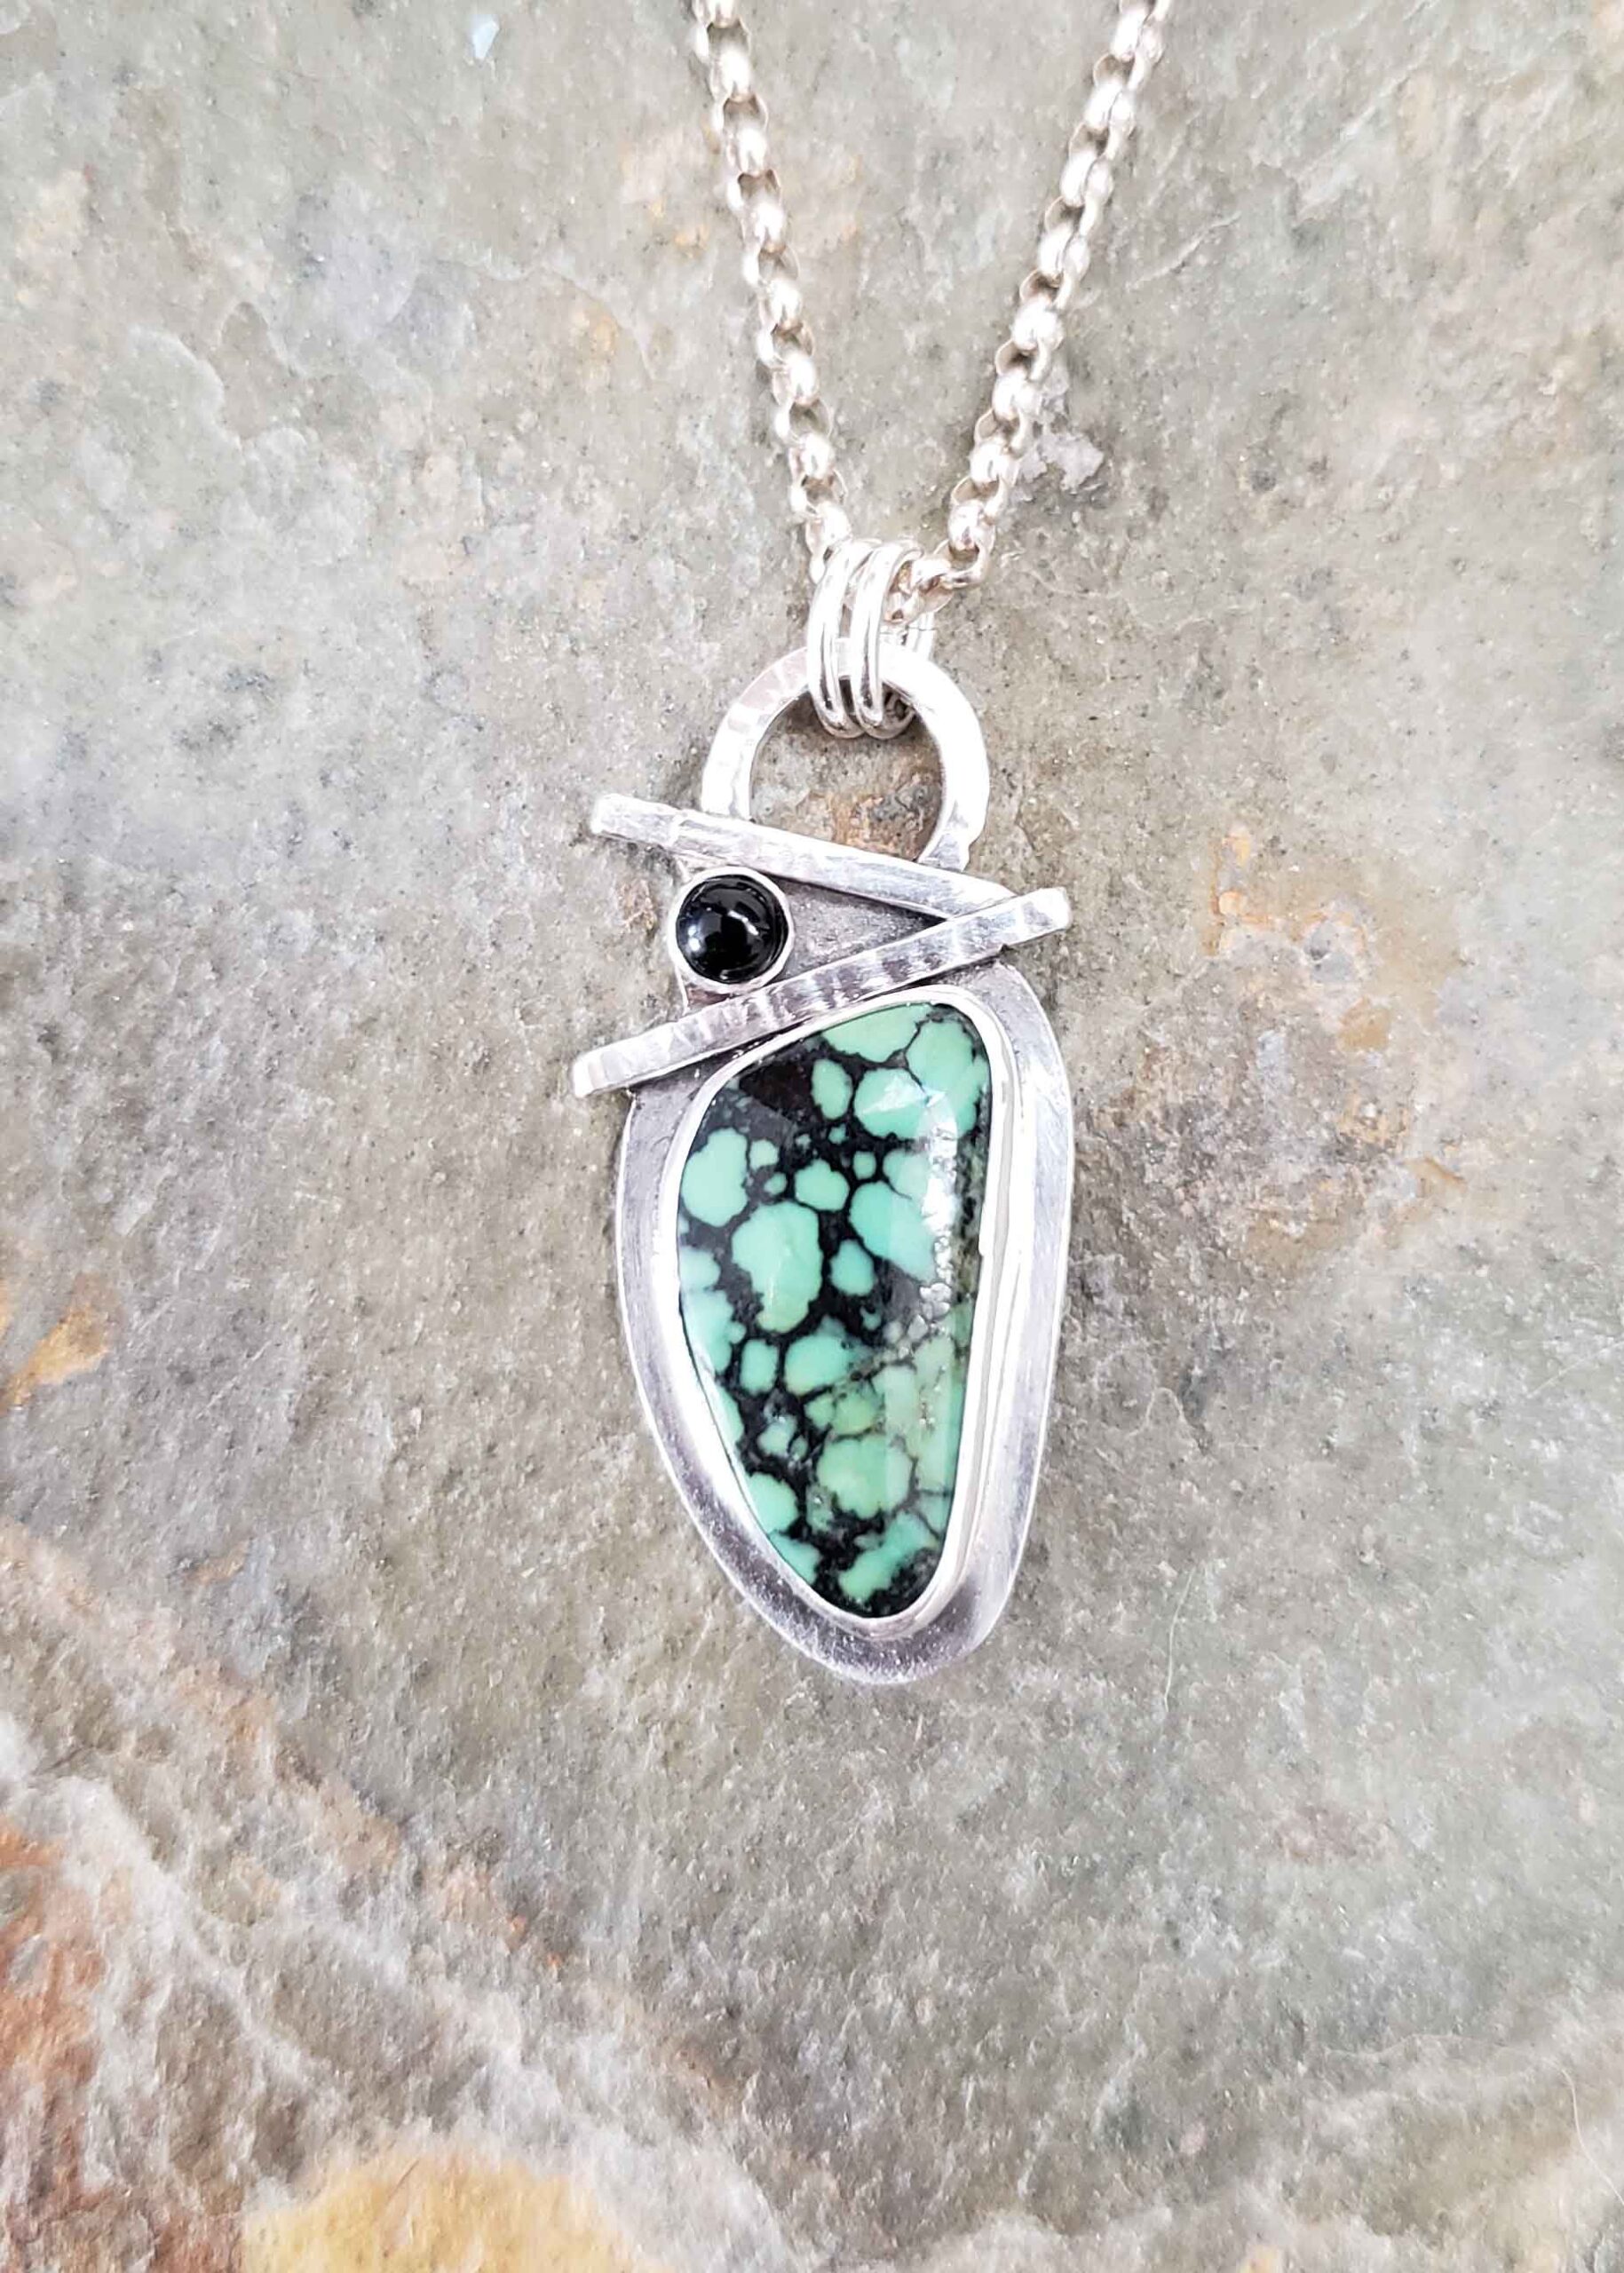 Turquoise with black veins accented with onyx in this sterling silver pendant.